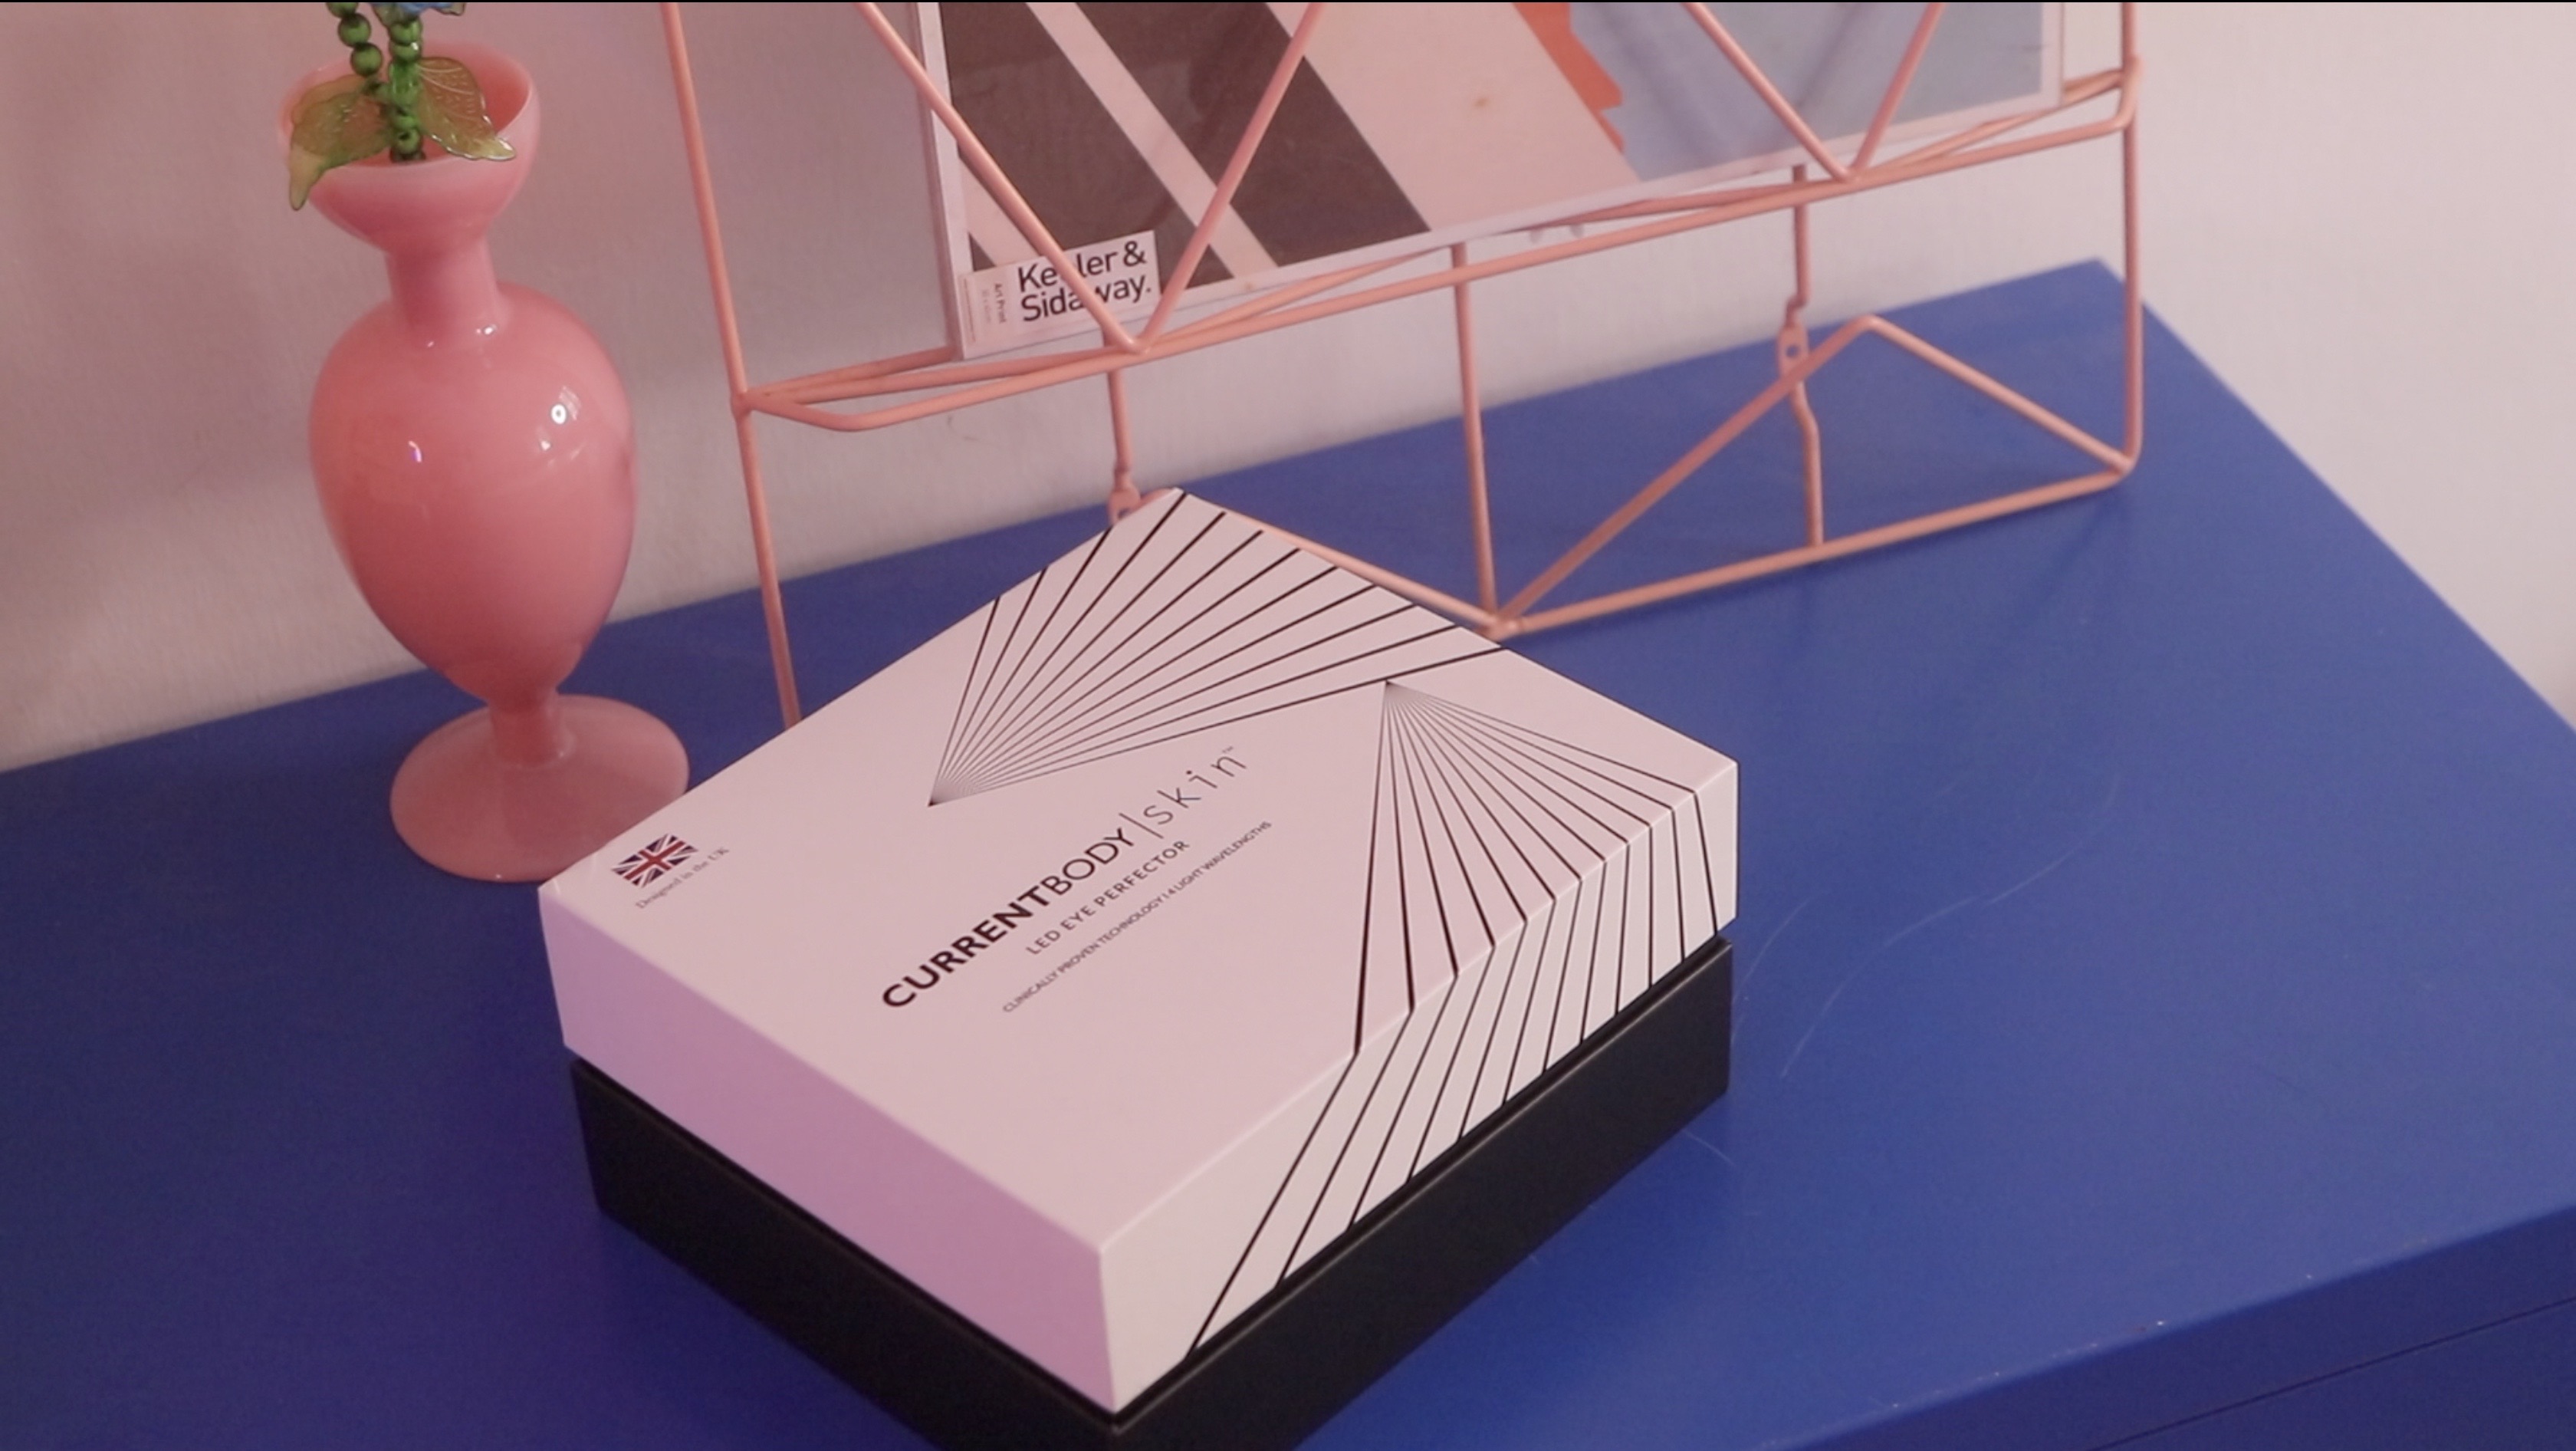 Unboxing the Currentbody Skin LED Eye Perfector